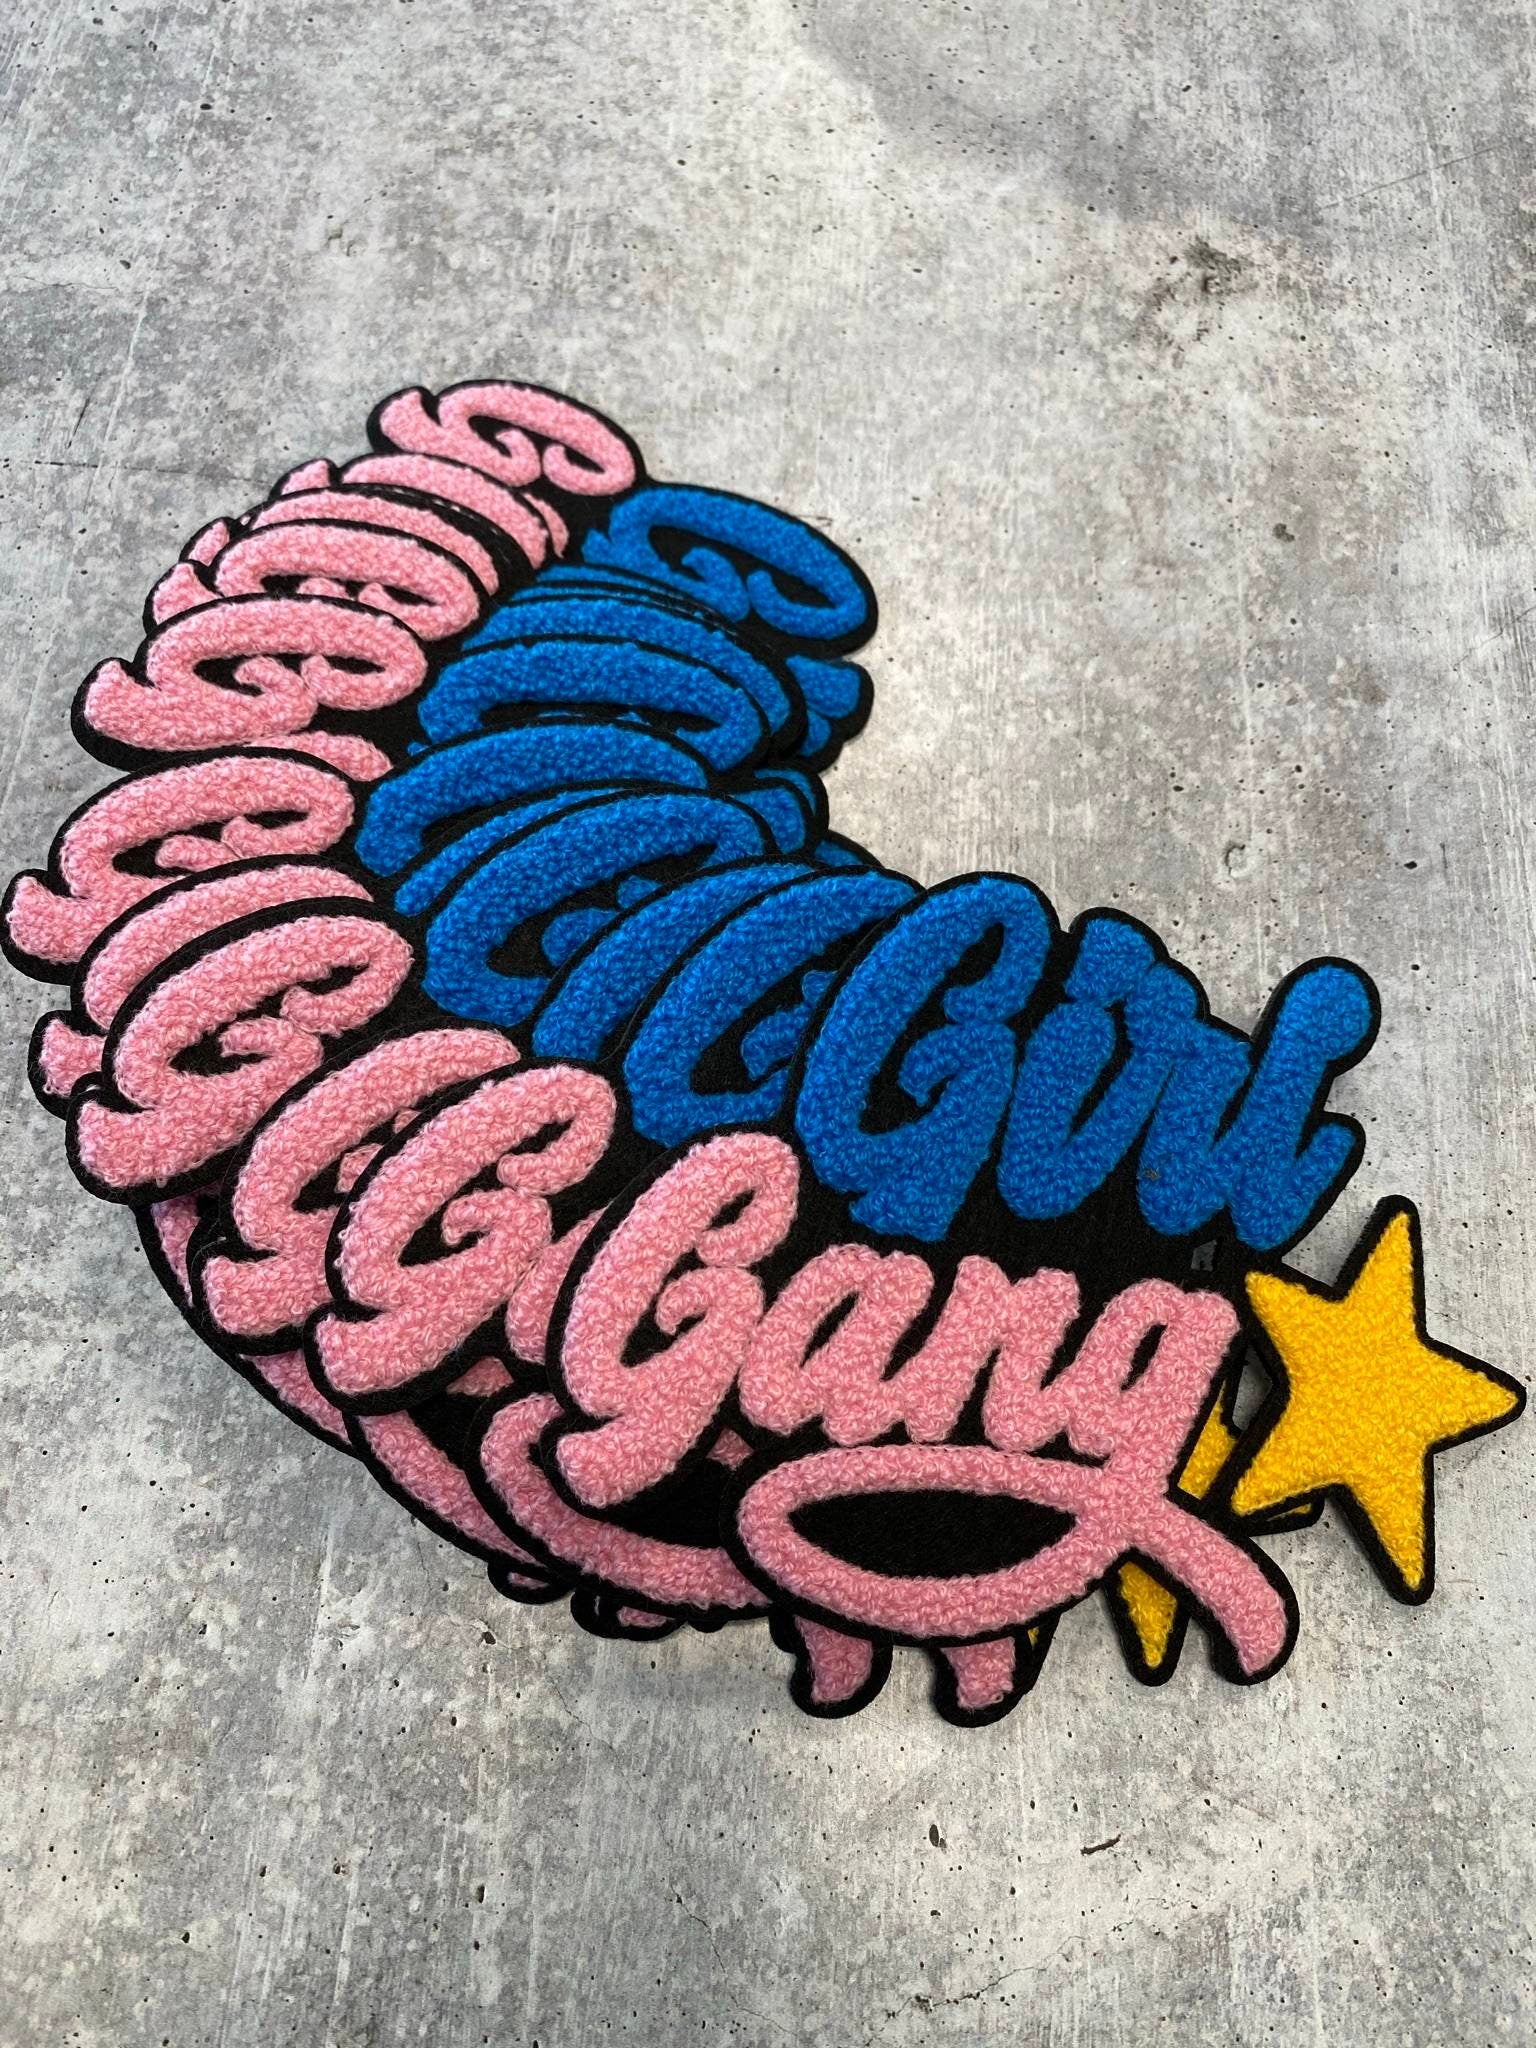 Blue and Pink w/Gold Star "Girl Gang" Chenille Patch, Colorful, Varsity Vintage Patch for DIY Crafts, Large Back Patch, Iron-on, 5.5"